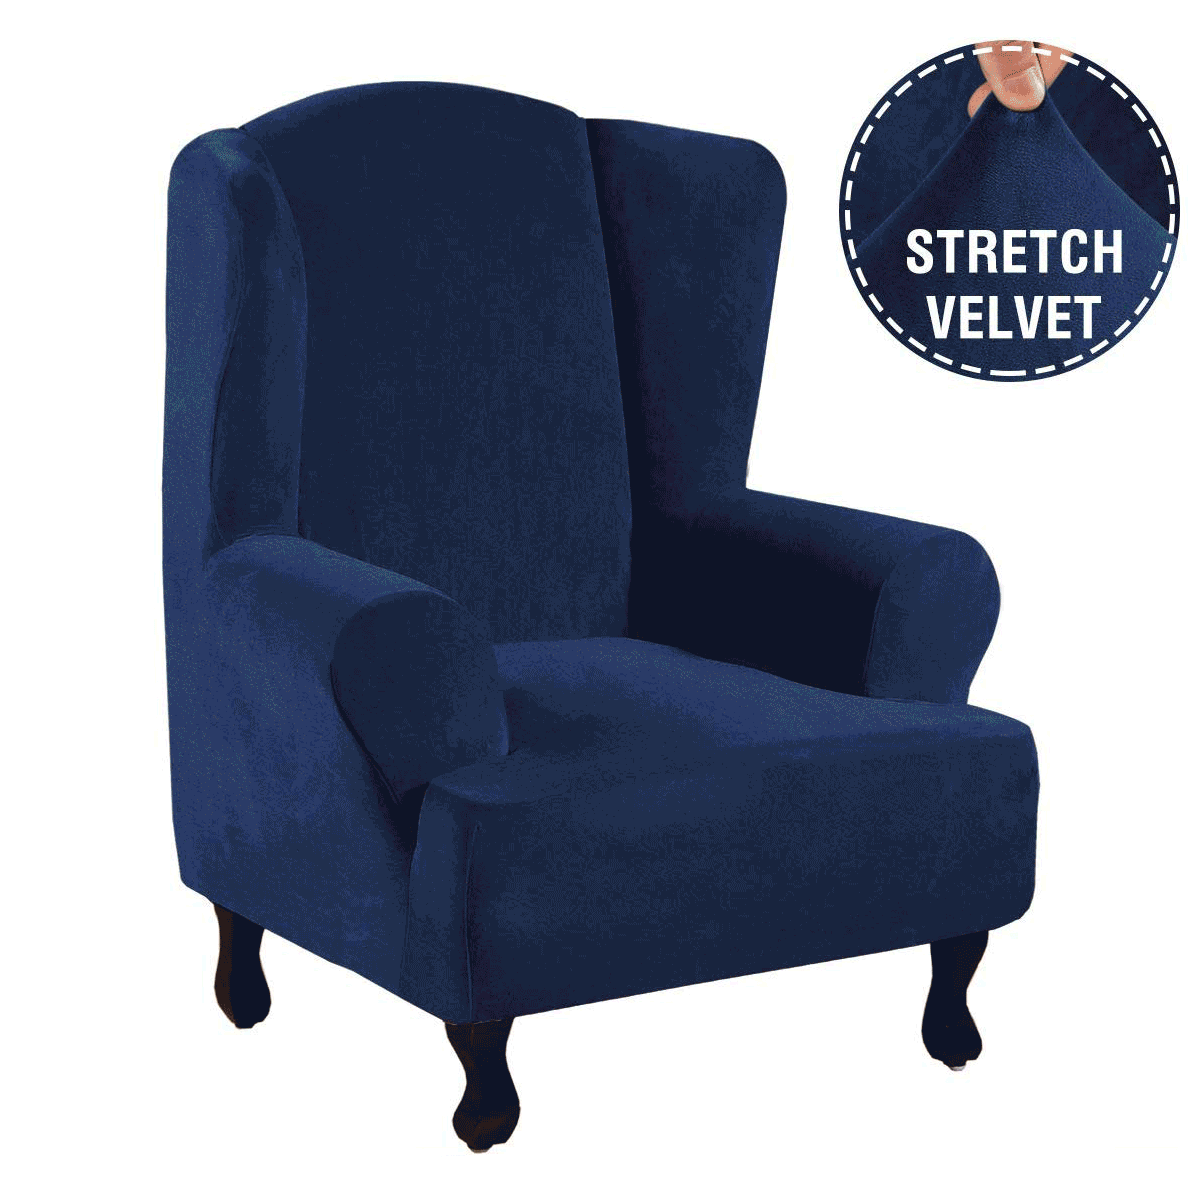 Details about   Velvet Wing Back Slipcover Stretch Wingback Armchair Chair Cover Protector Set 